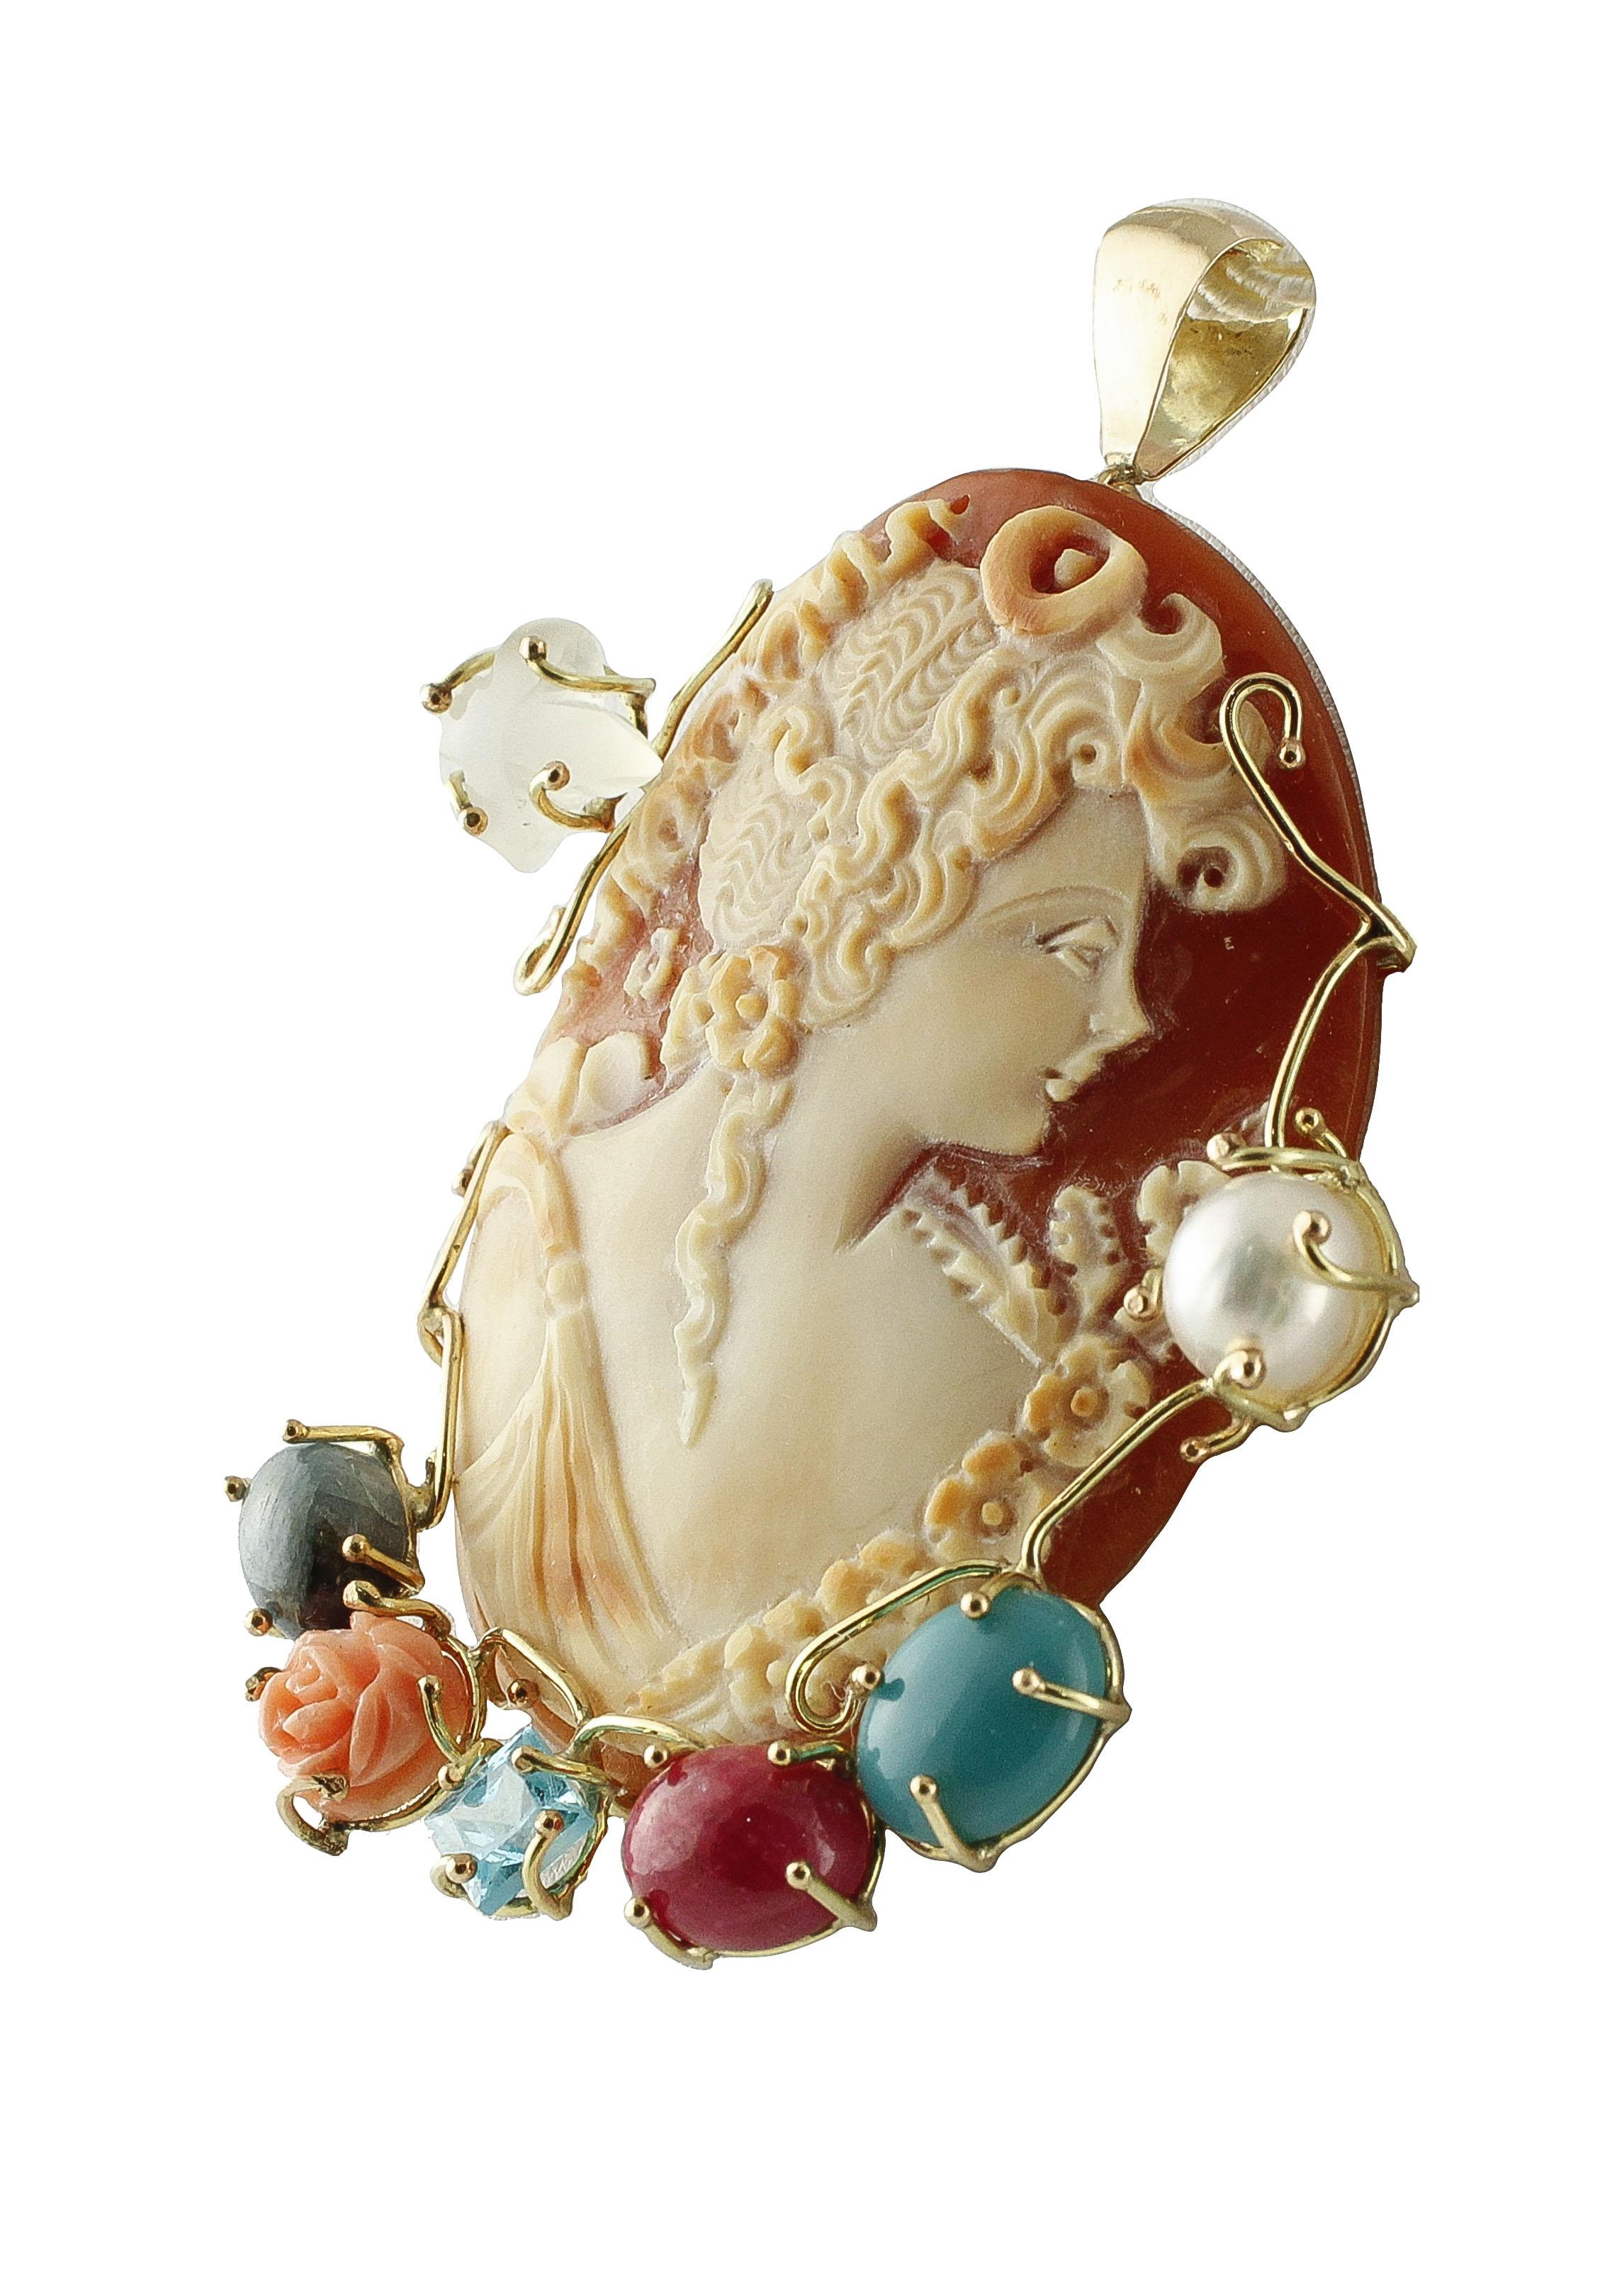 Gorgeous cameo pendant in 9K yellow gold structure embellished with blue sapphire, ruby, turquoise paste, blue topaz, rose shape pink coral, moonstone, and white glossy pearl.
Total Weight 17.10 g 
R.F iea
Pendant Dimentions 68 mm X 51 mm 
Cameo